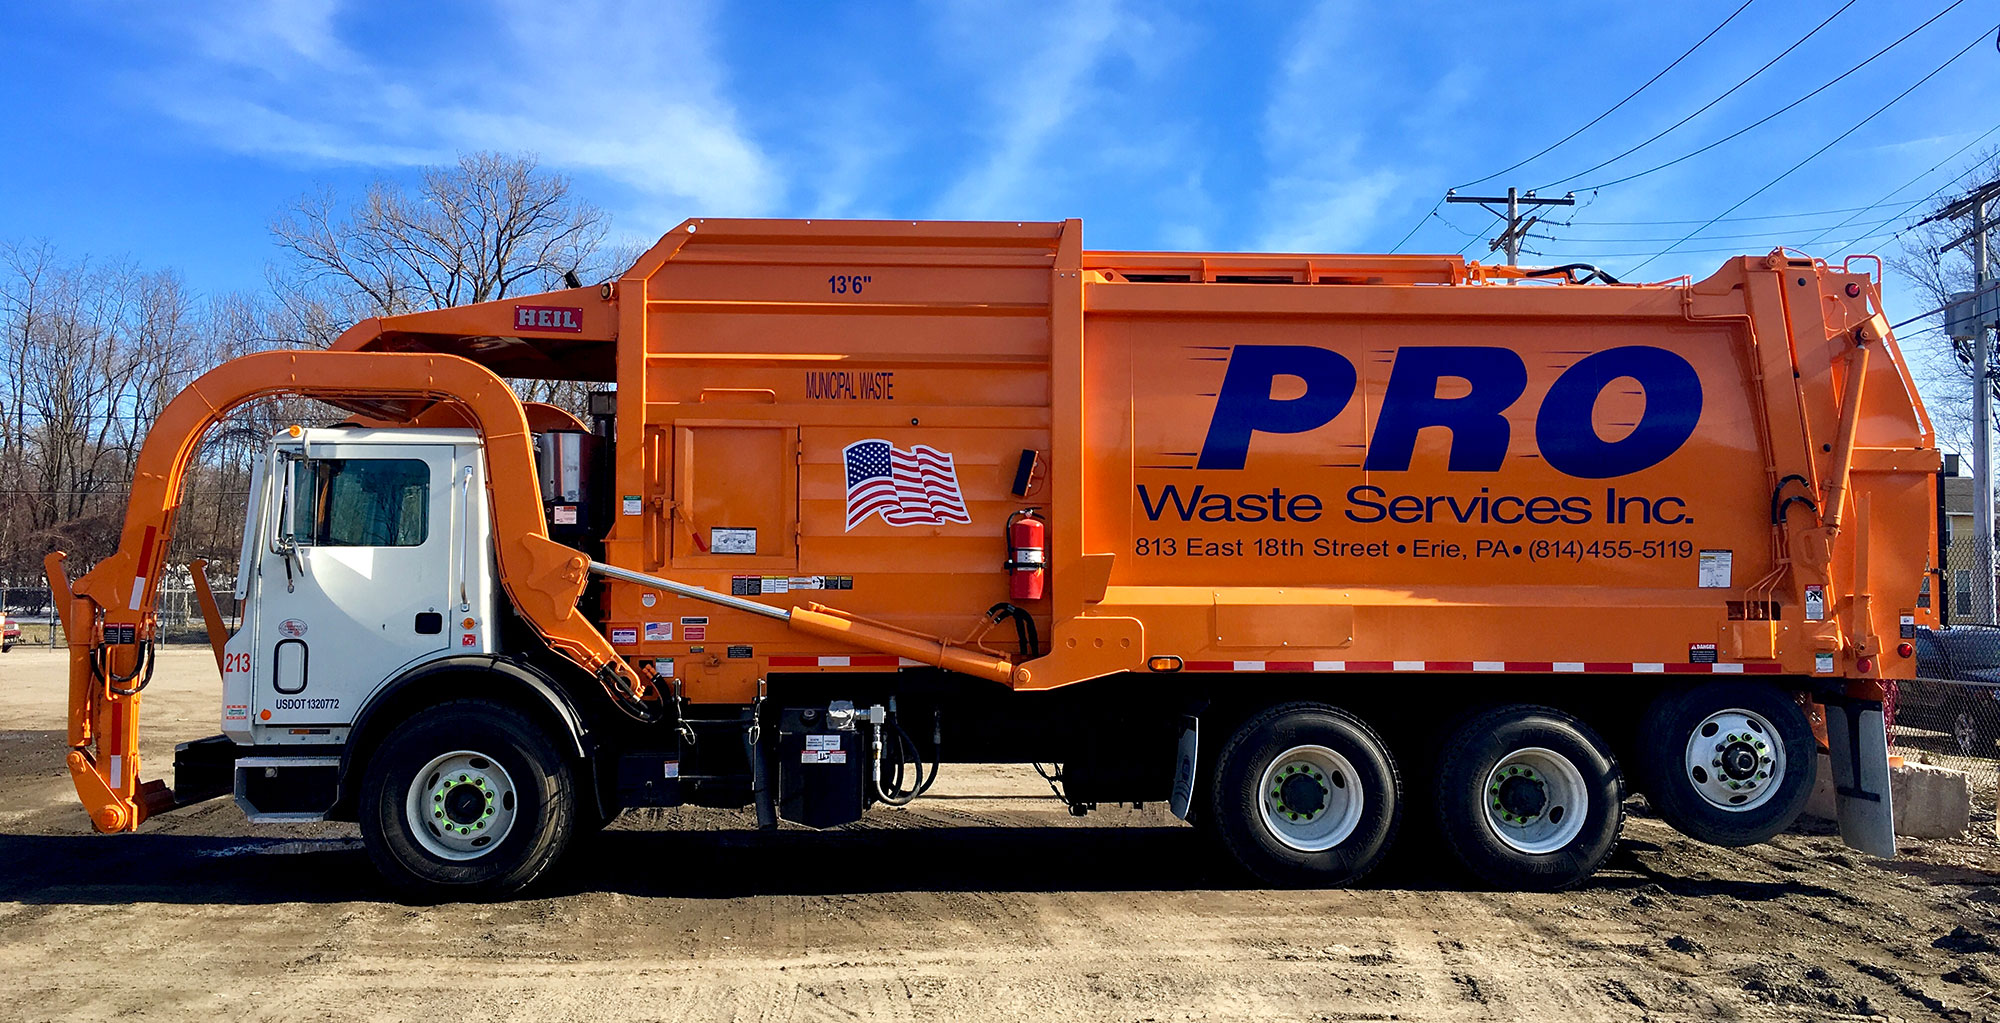 Garbage Removal Services Pro Waste Services Inc.